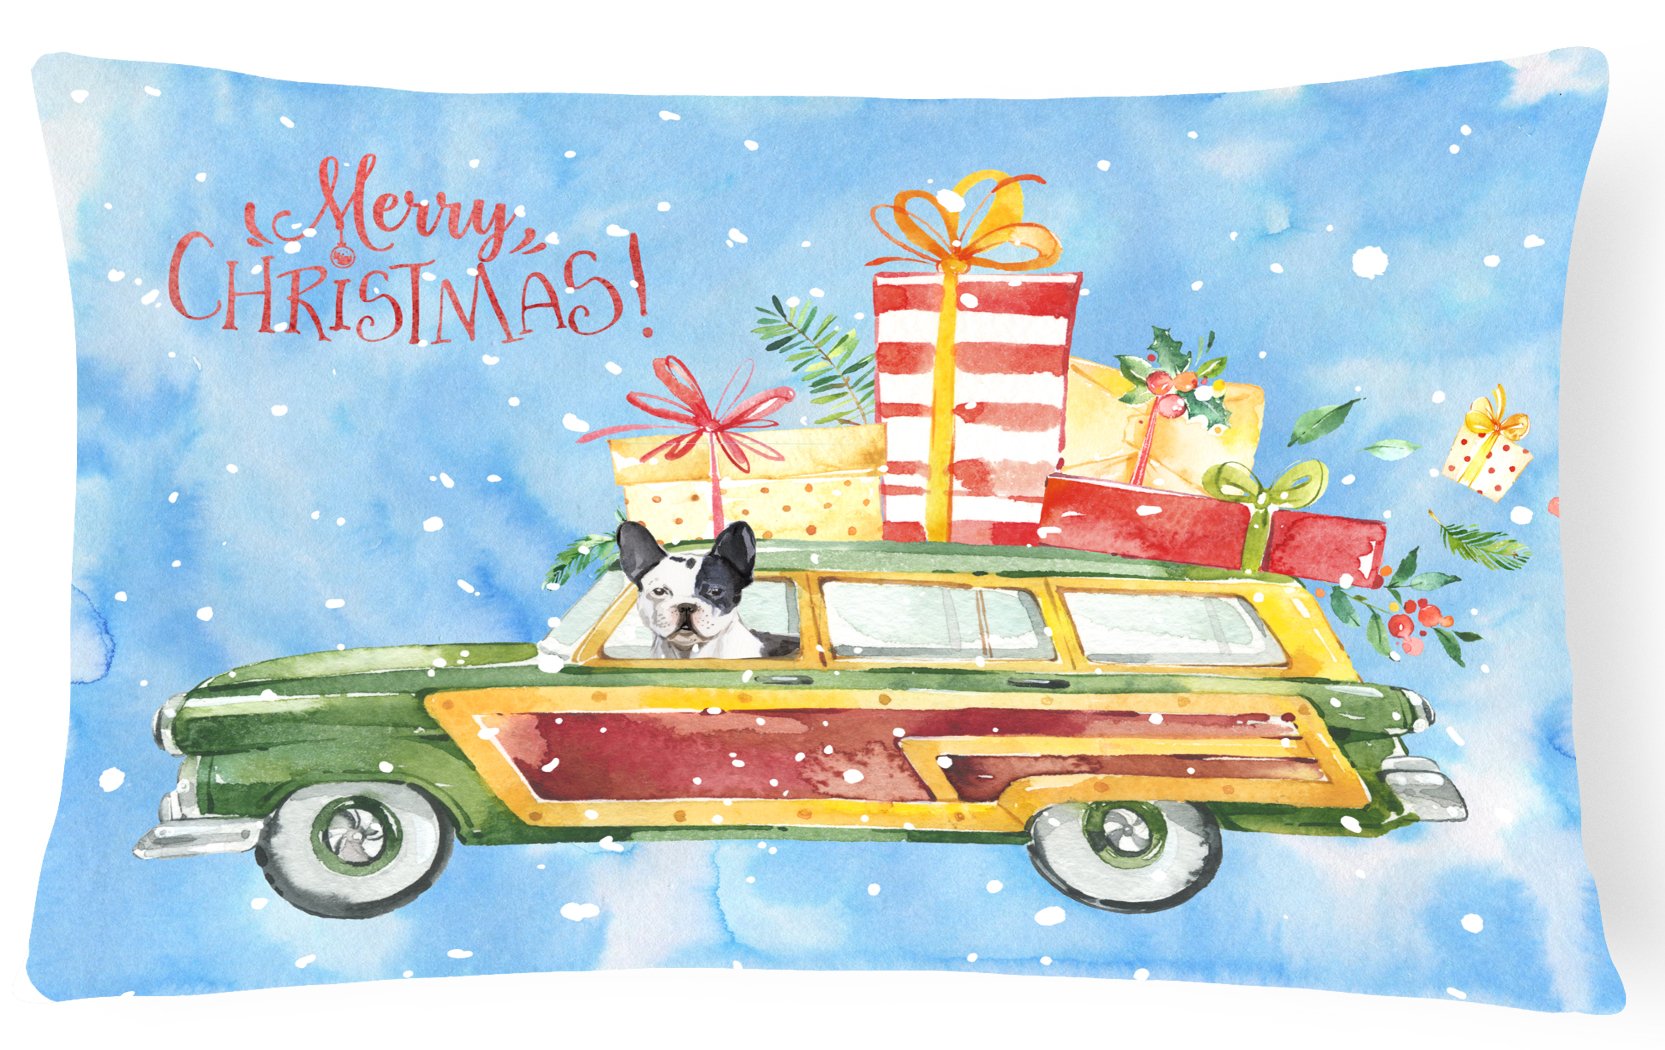 Merry Christmas French Bulldog Canvas Fabric Decorative Pillow CK2444PW1216 by Caroline's Treasures